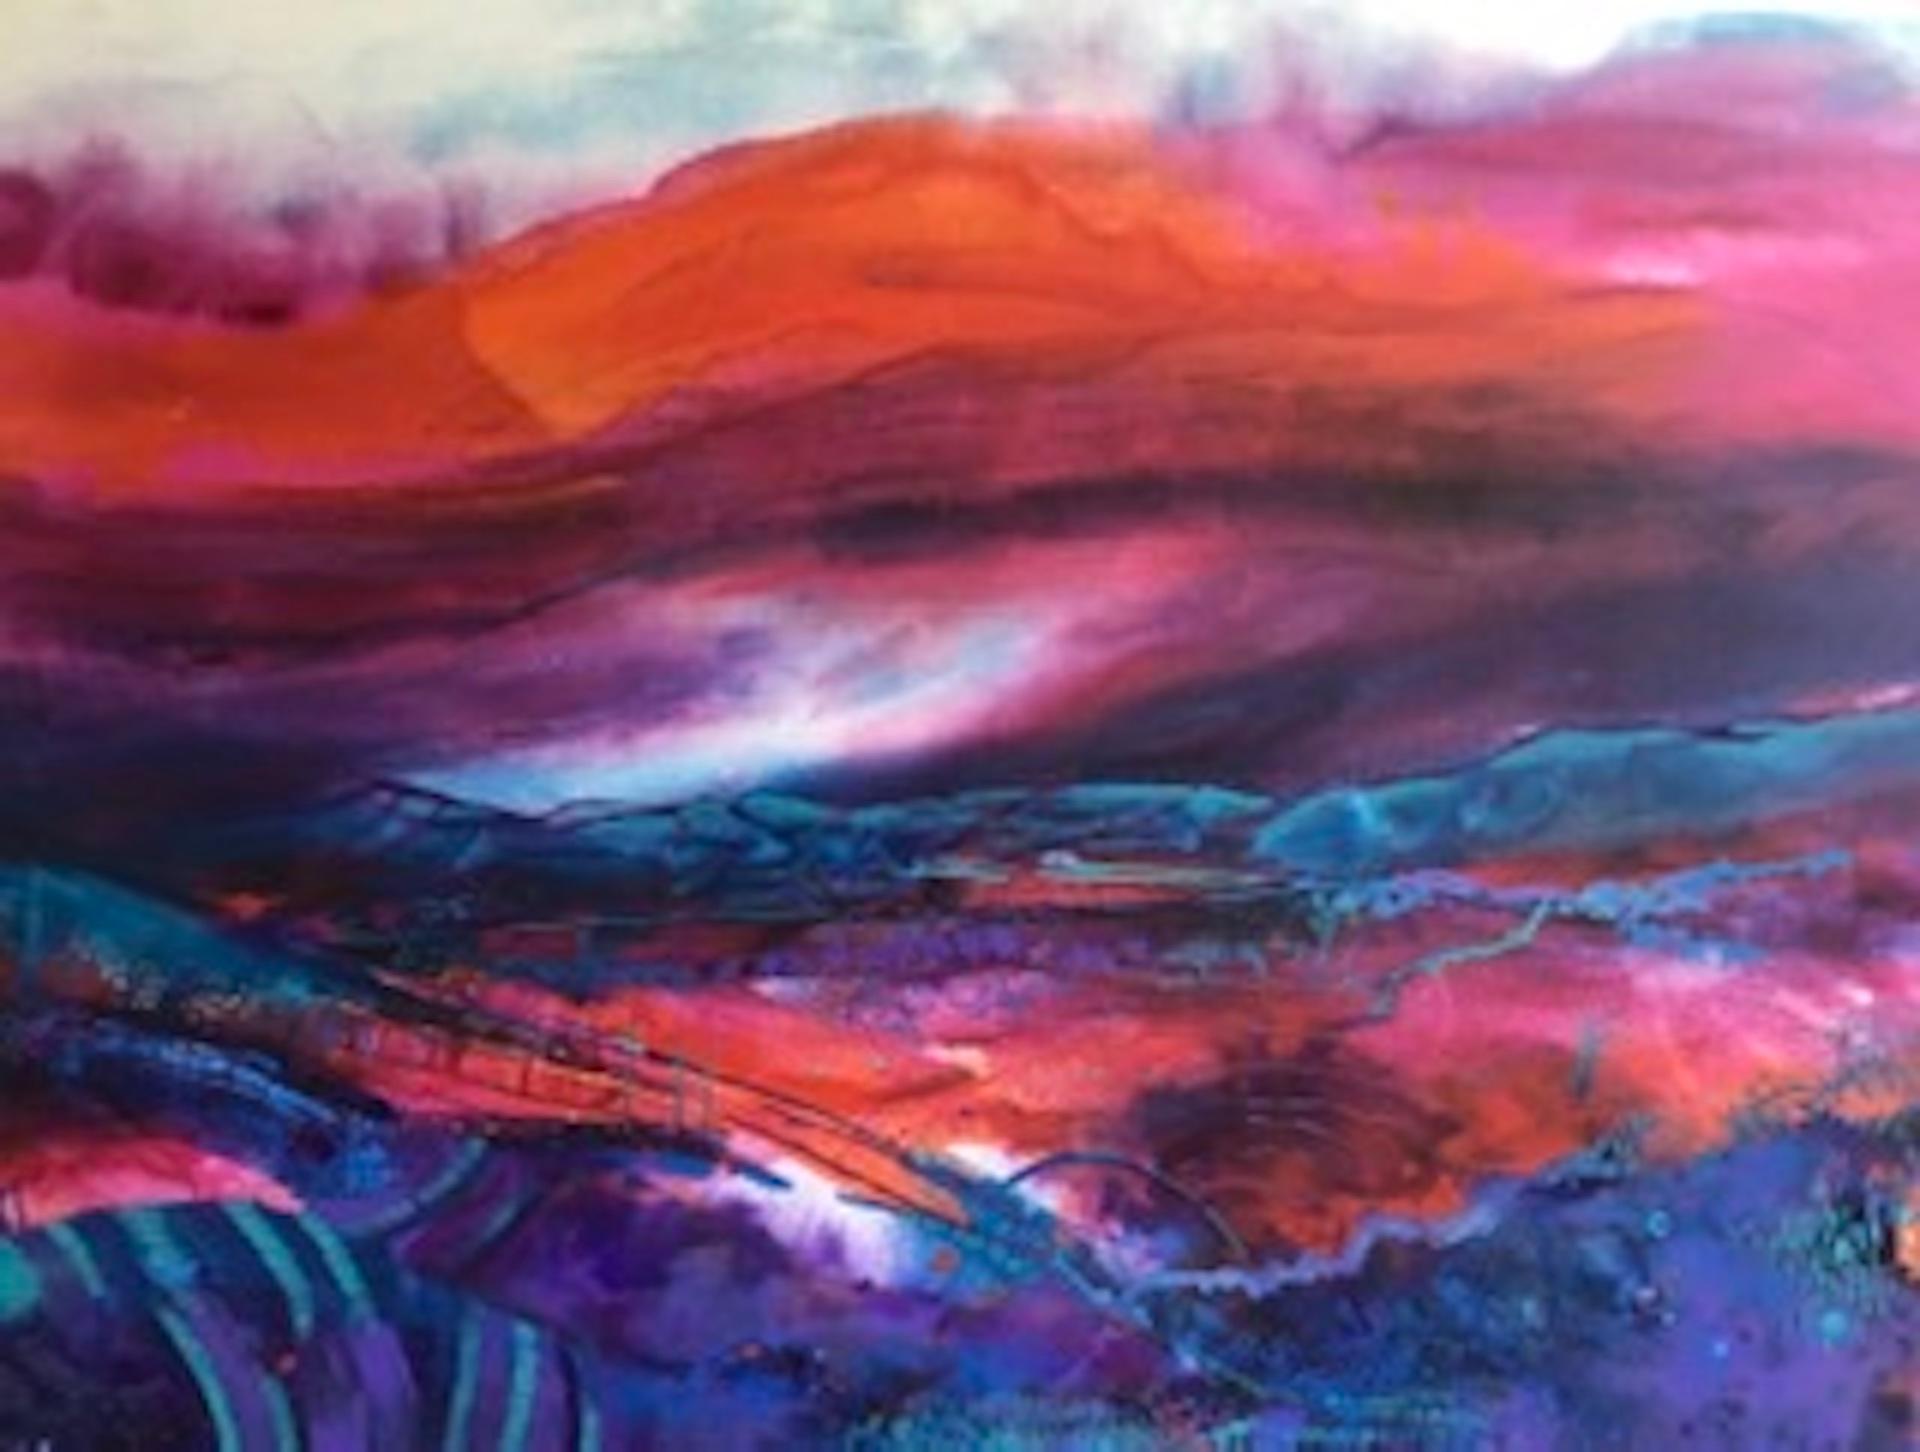 Jan Gardner
Magenta Land
Original Acrylic Painting
Acrylic Paint on Linen
Canvas Size: H 100cm x W 100cm
Sold Unframed
Please note that insitu images are purely an indication of how a piece may look.

Magenta Land is a contemporary landscape